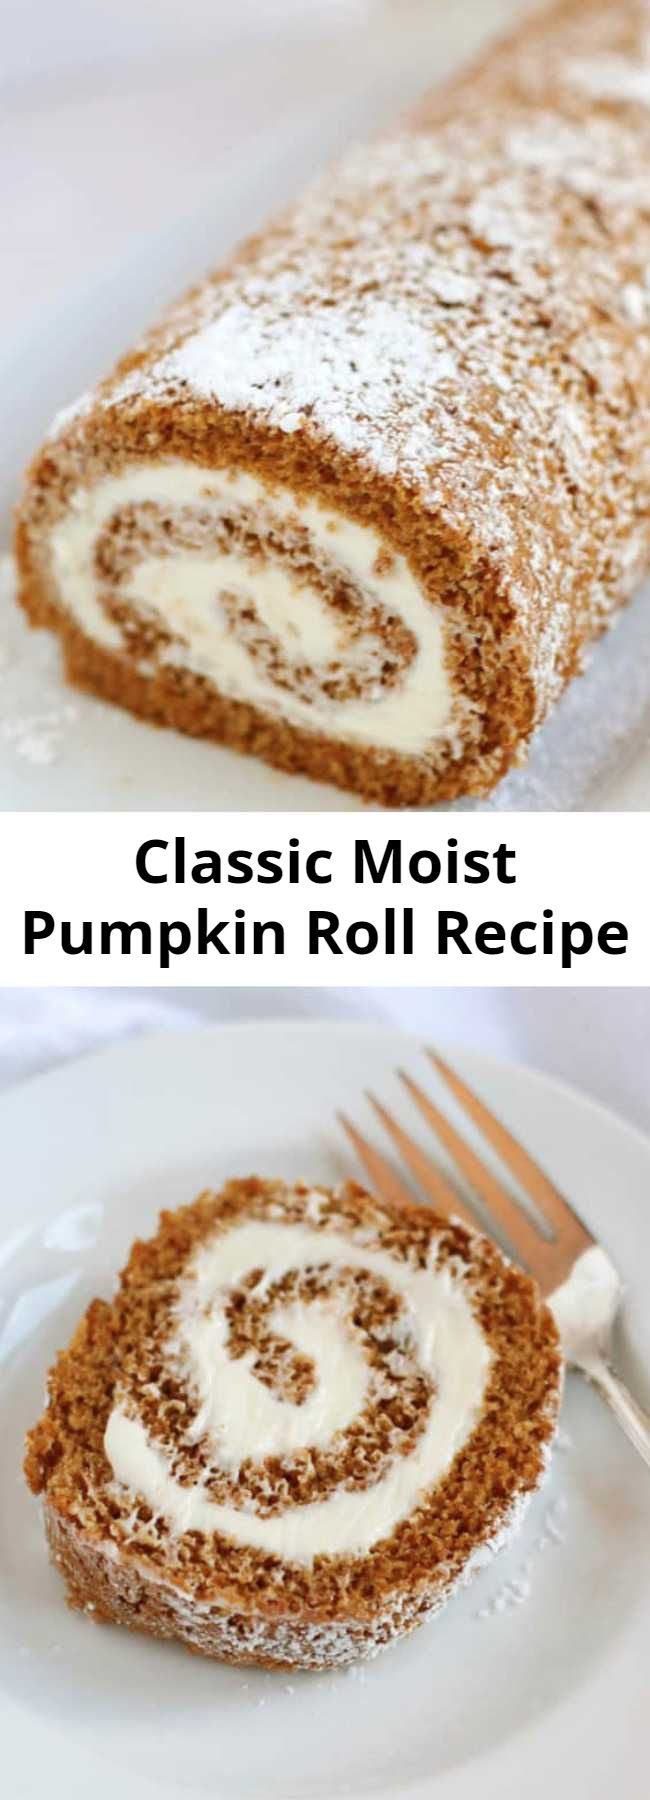 Classic Moist Pumpkin Roll Recipe - Cinnamon and cloves add the spice to this pumpkin sheet cake, topped with cream cheese frosting and rolled into a festive log.